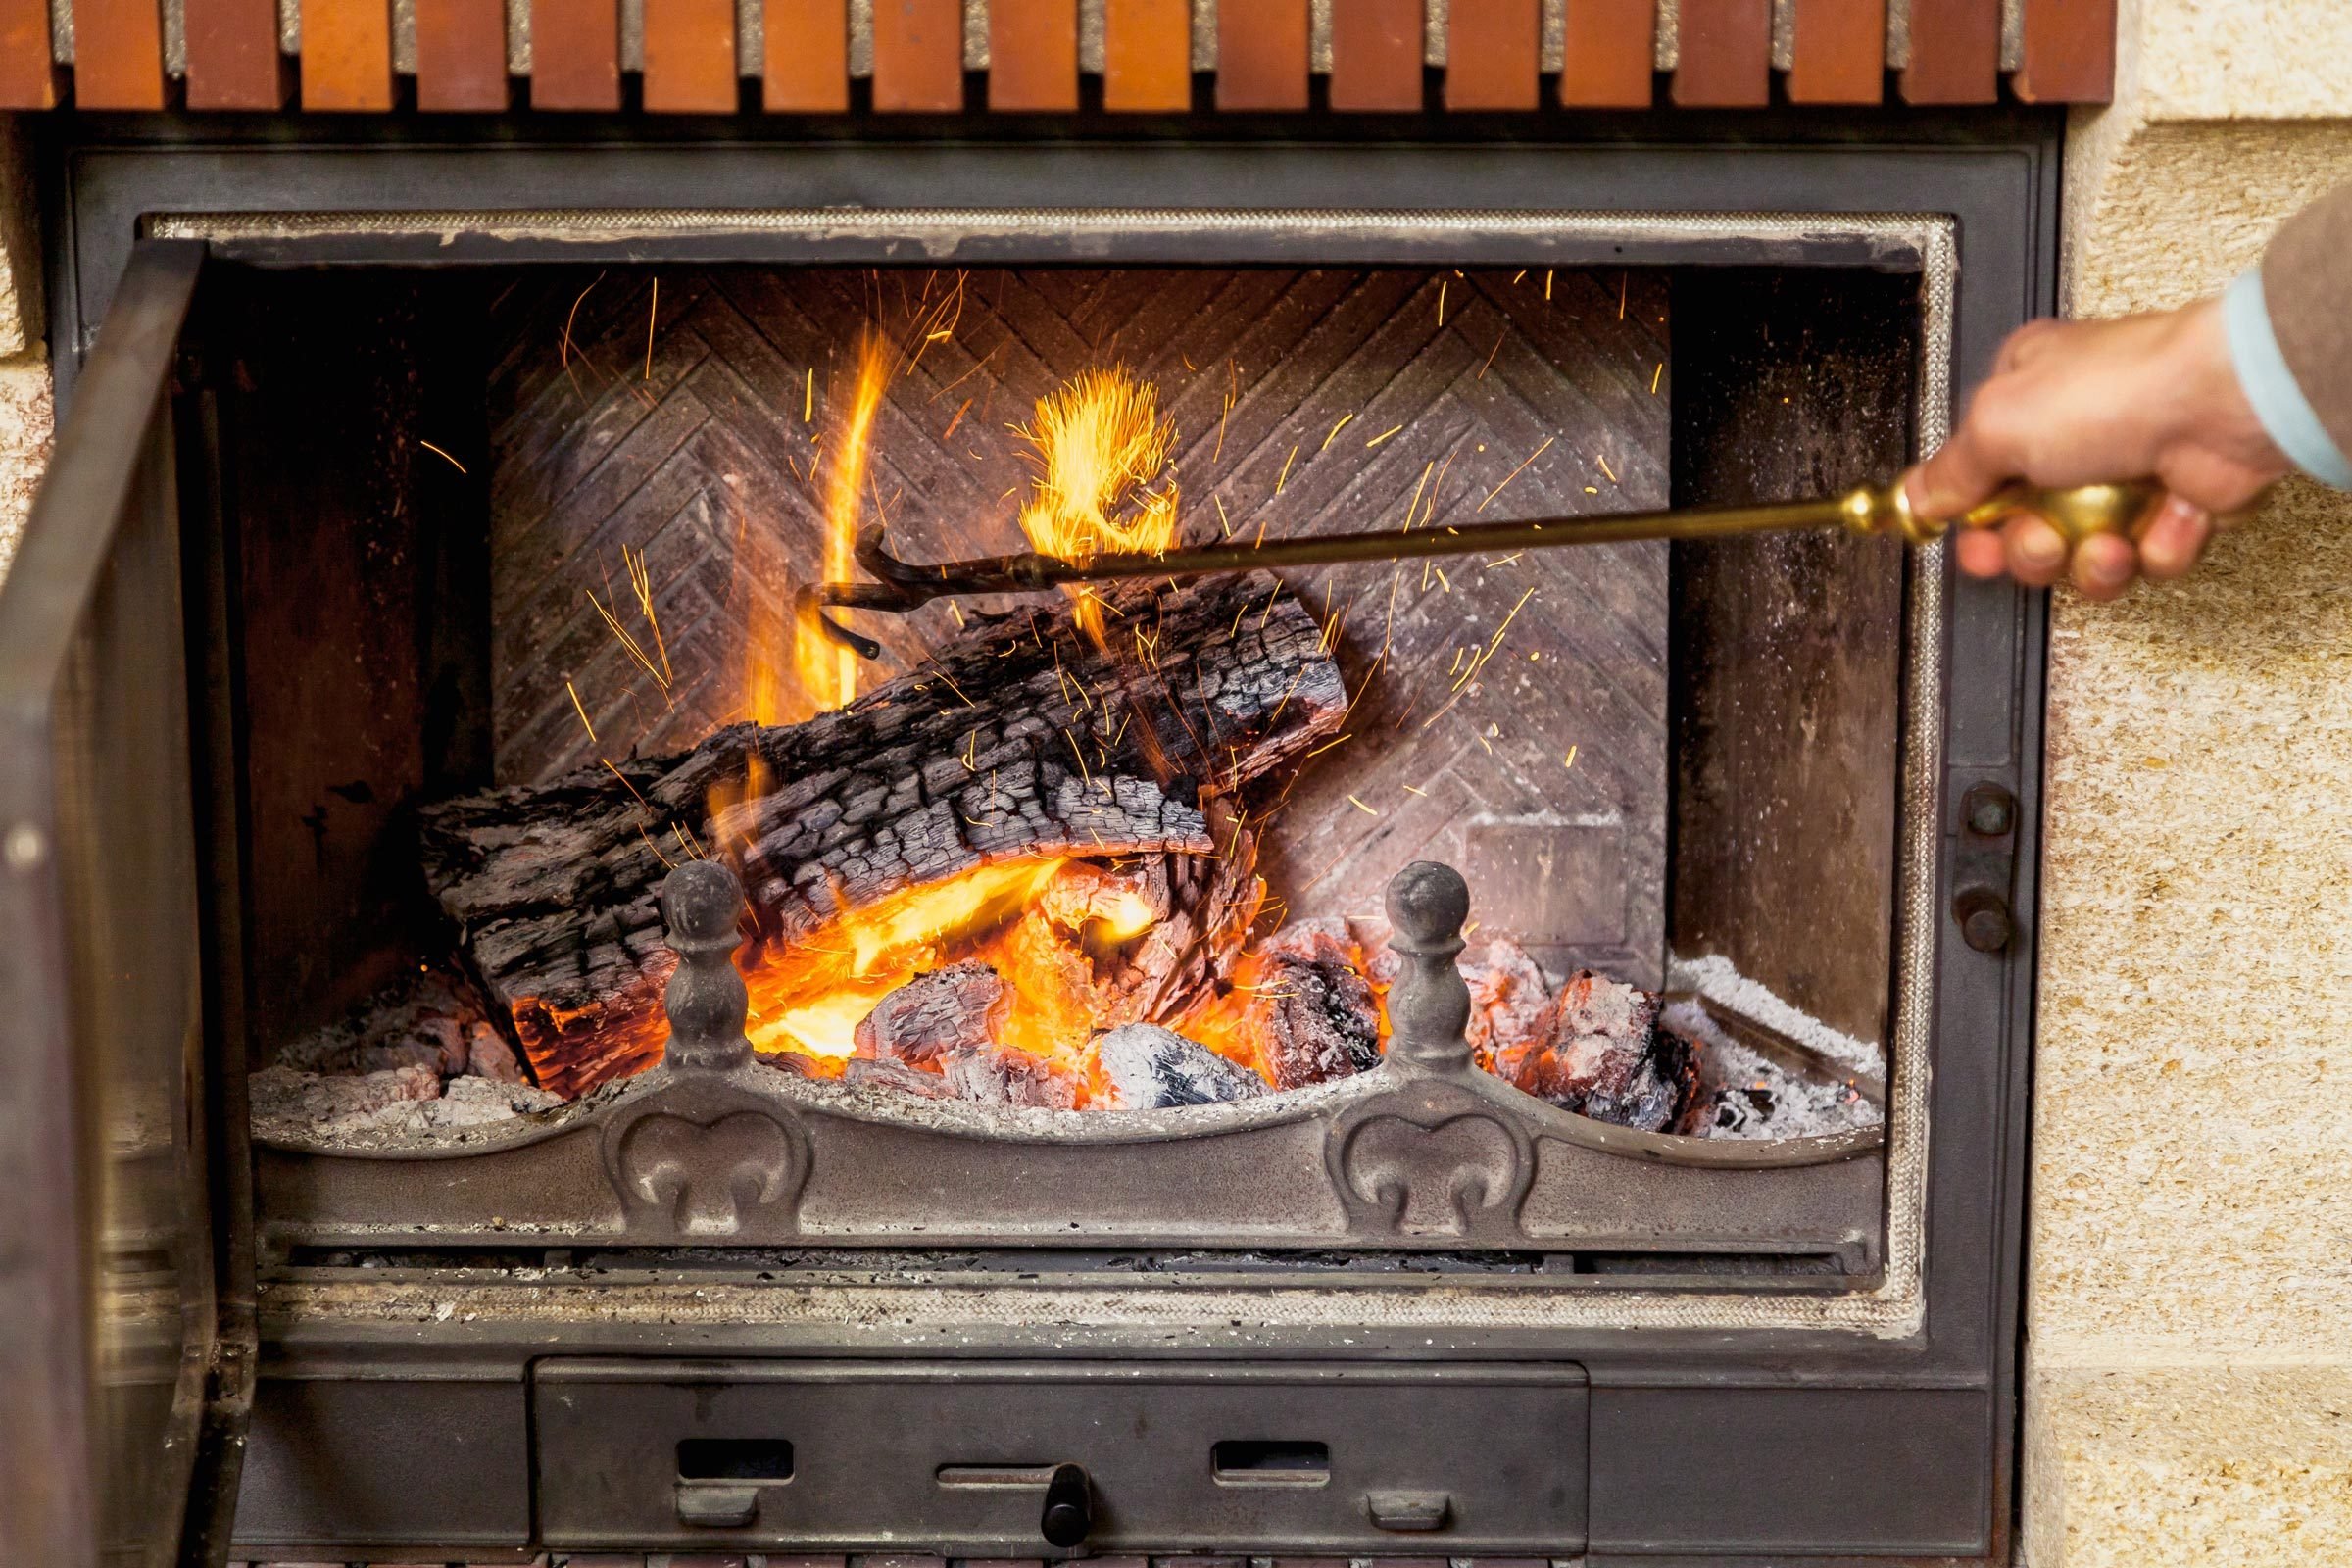 How To Put Out a Fire in a Fireplace